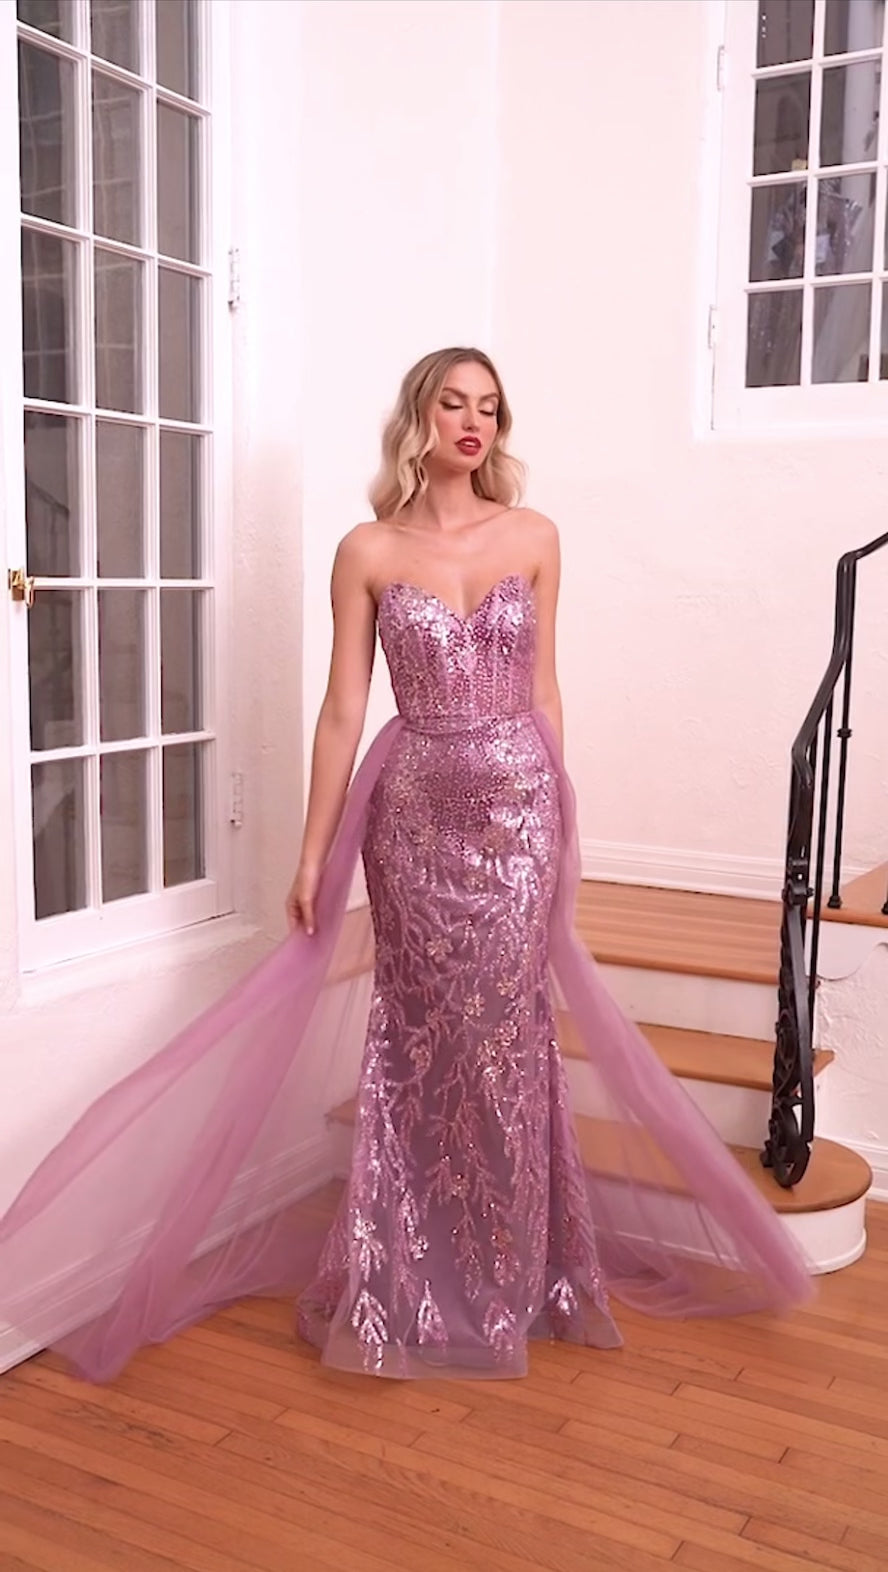 luxe prom dress with sequins and glitters